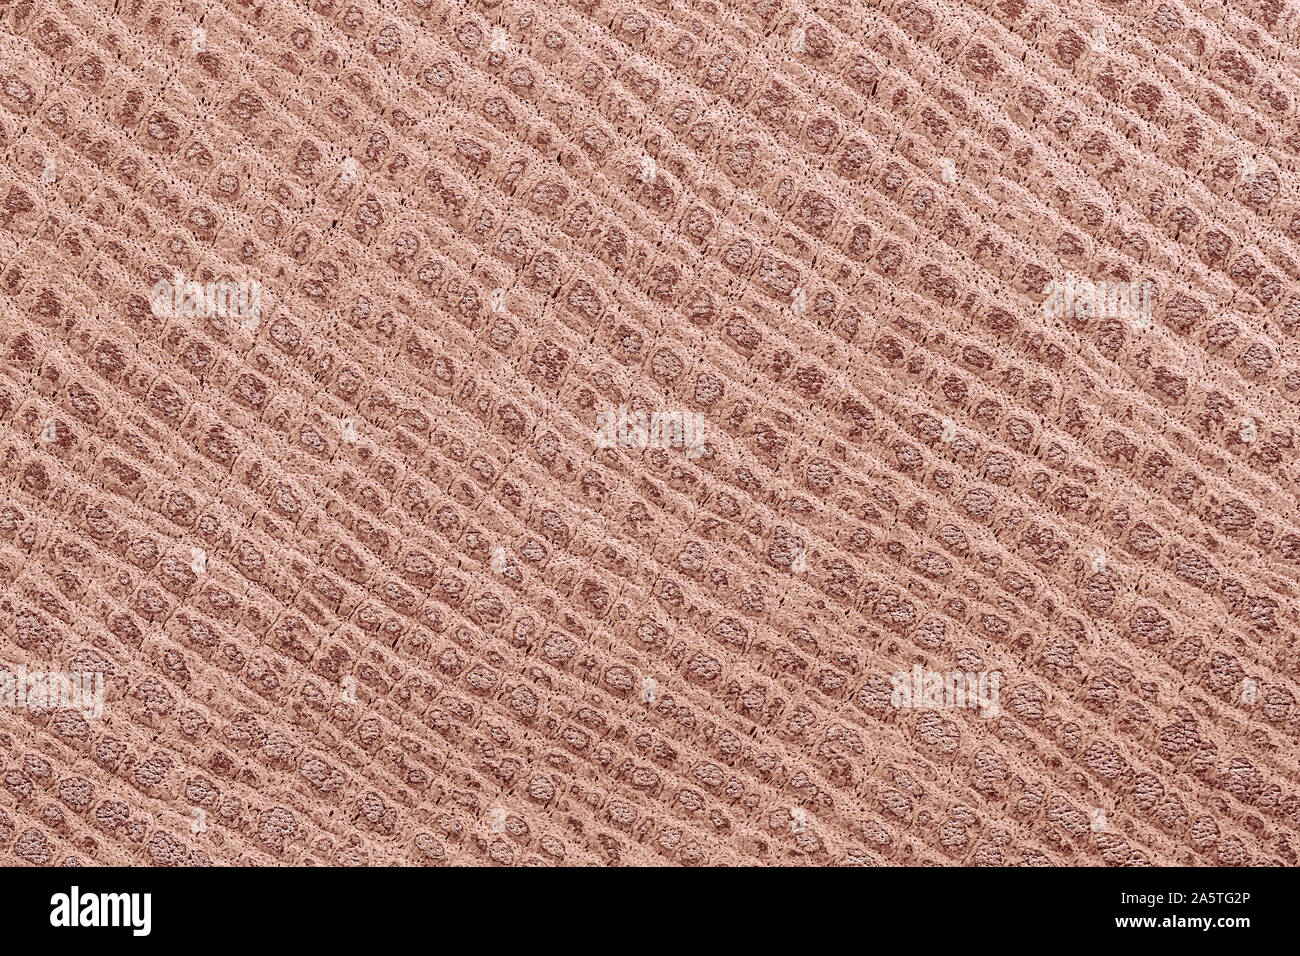 Texture of genuine grainy leather close-up, color of porous milk chocolate. Fashionable modern background, copy space Stock Photo